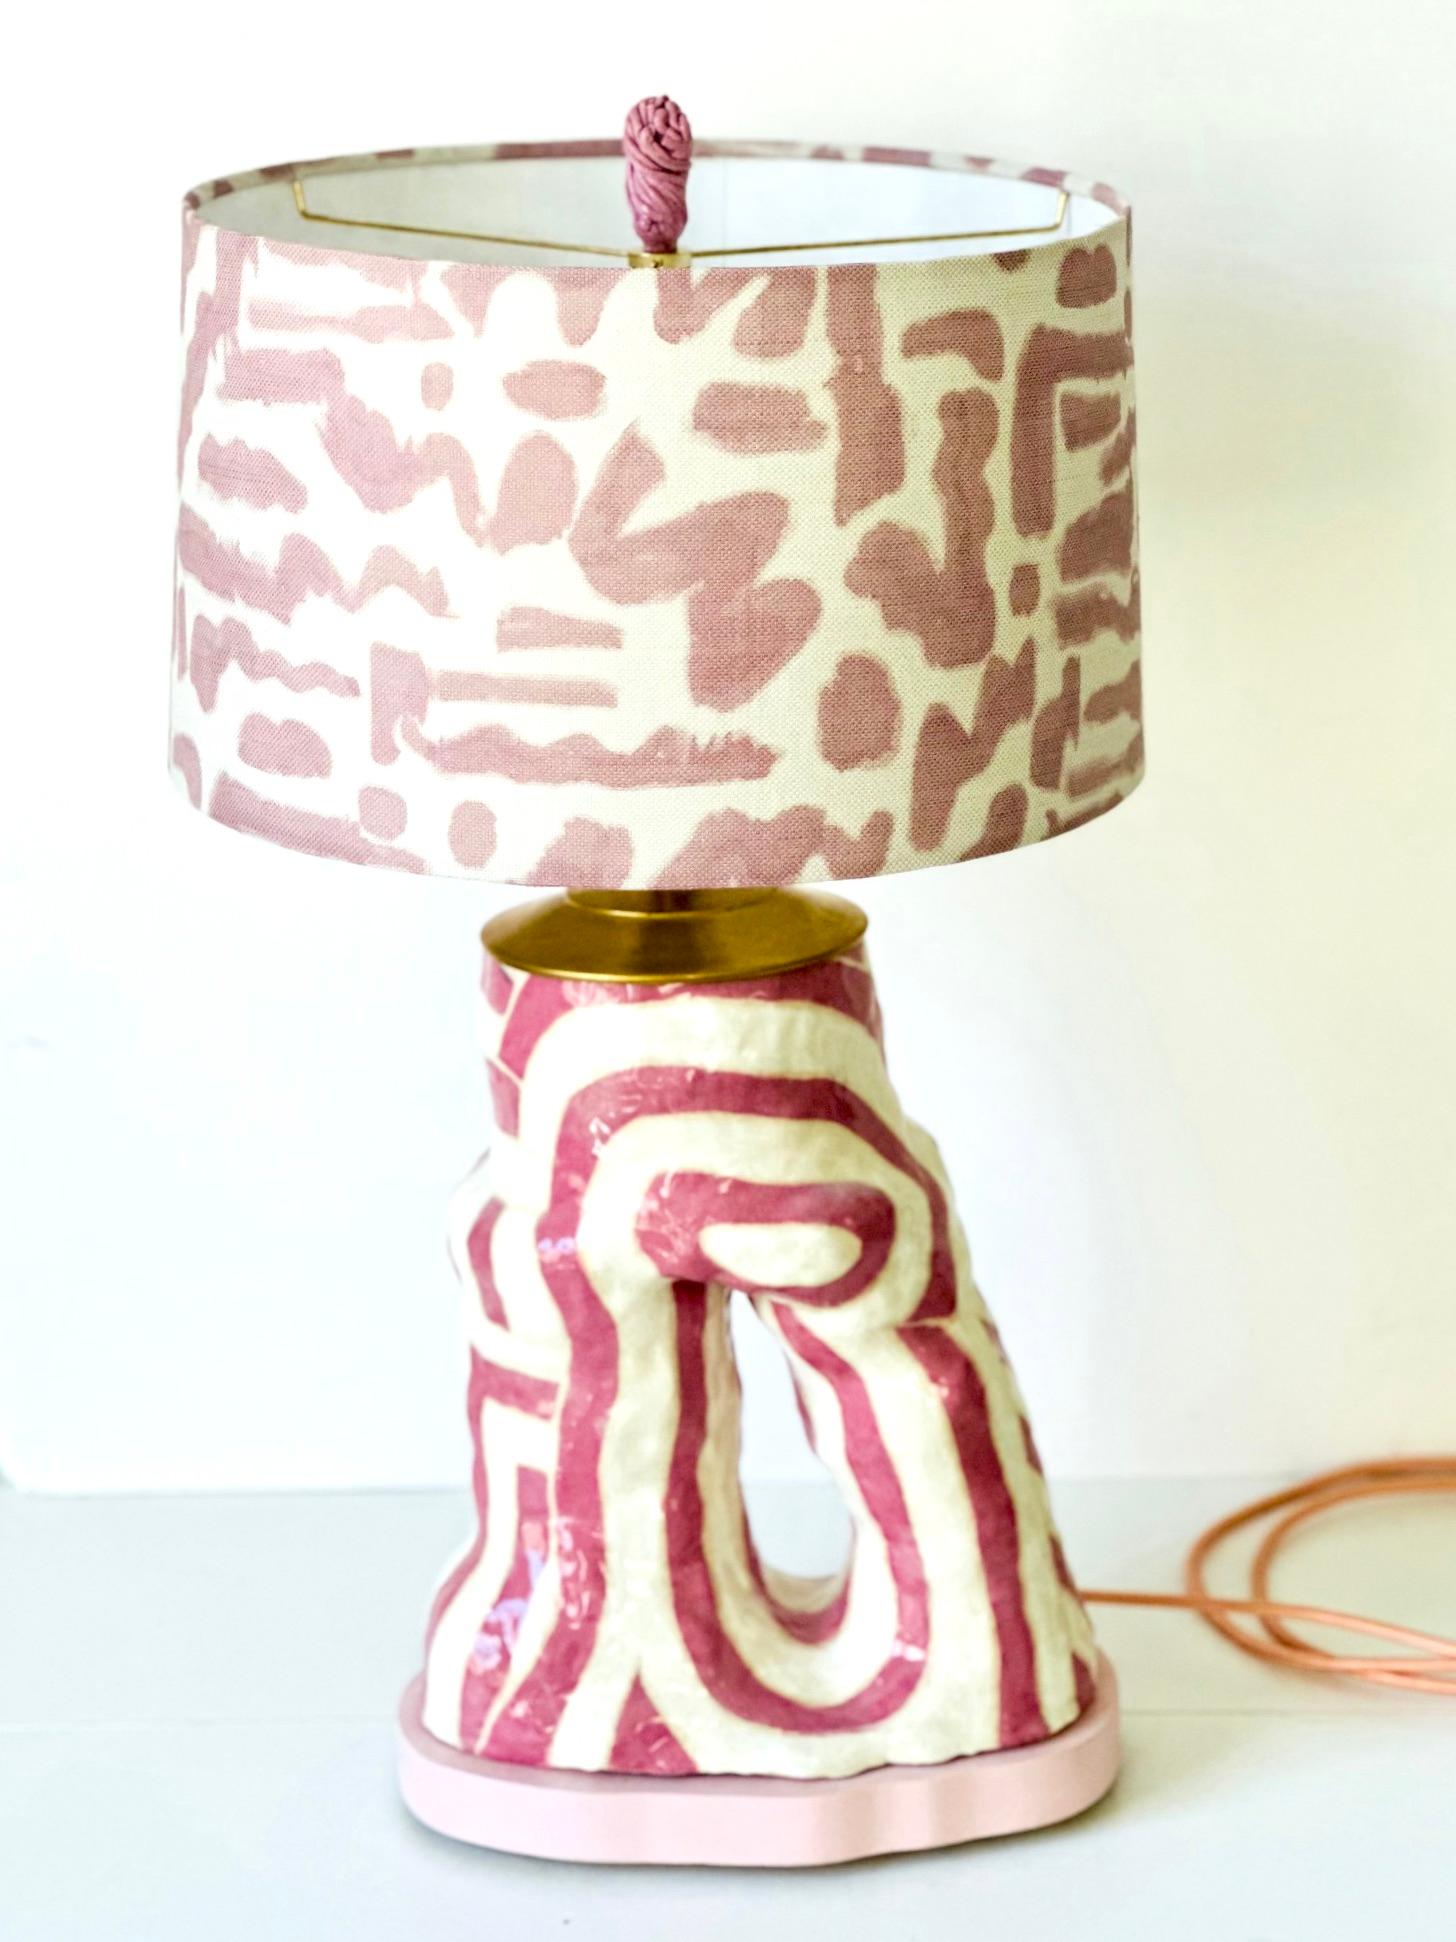 American Contemporary Hand-Built Ceramic Lamps by Artists Abby Kasonik & Kiki Slaughter